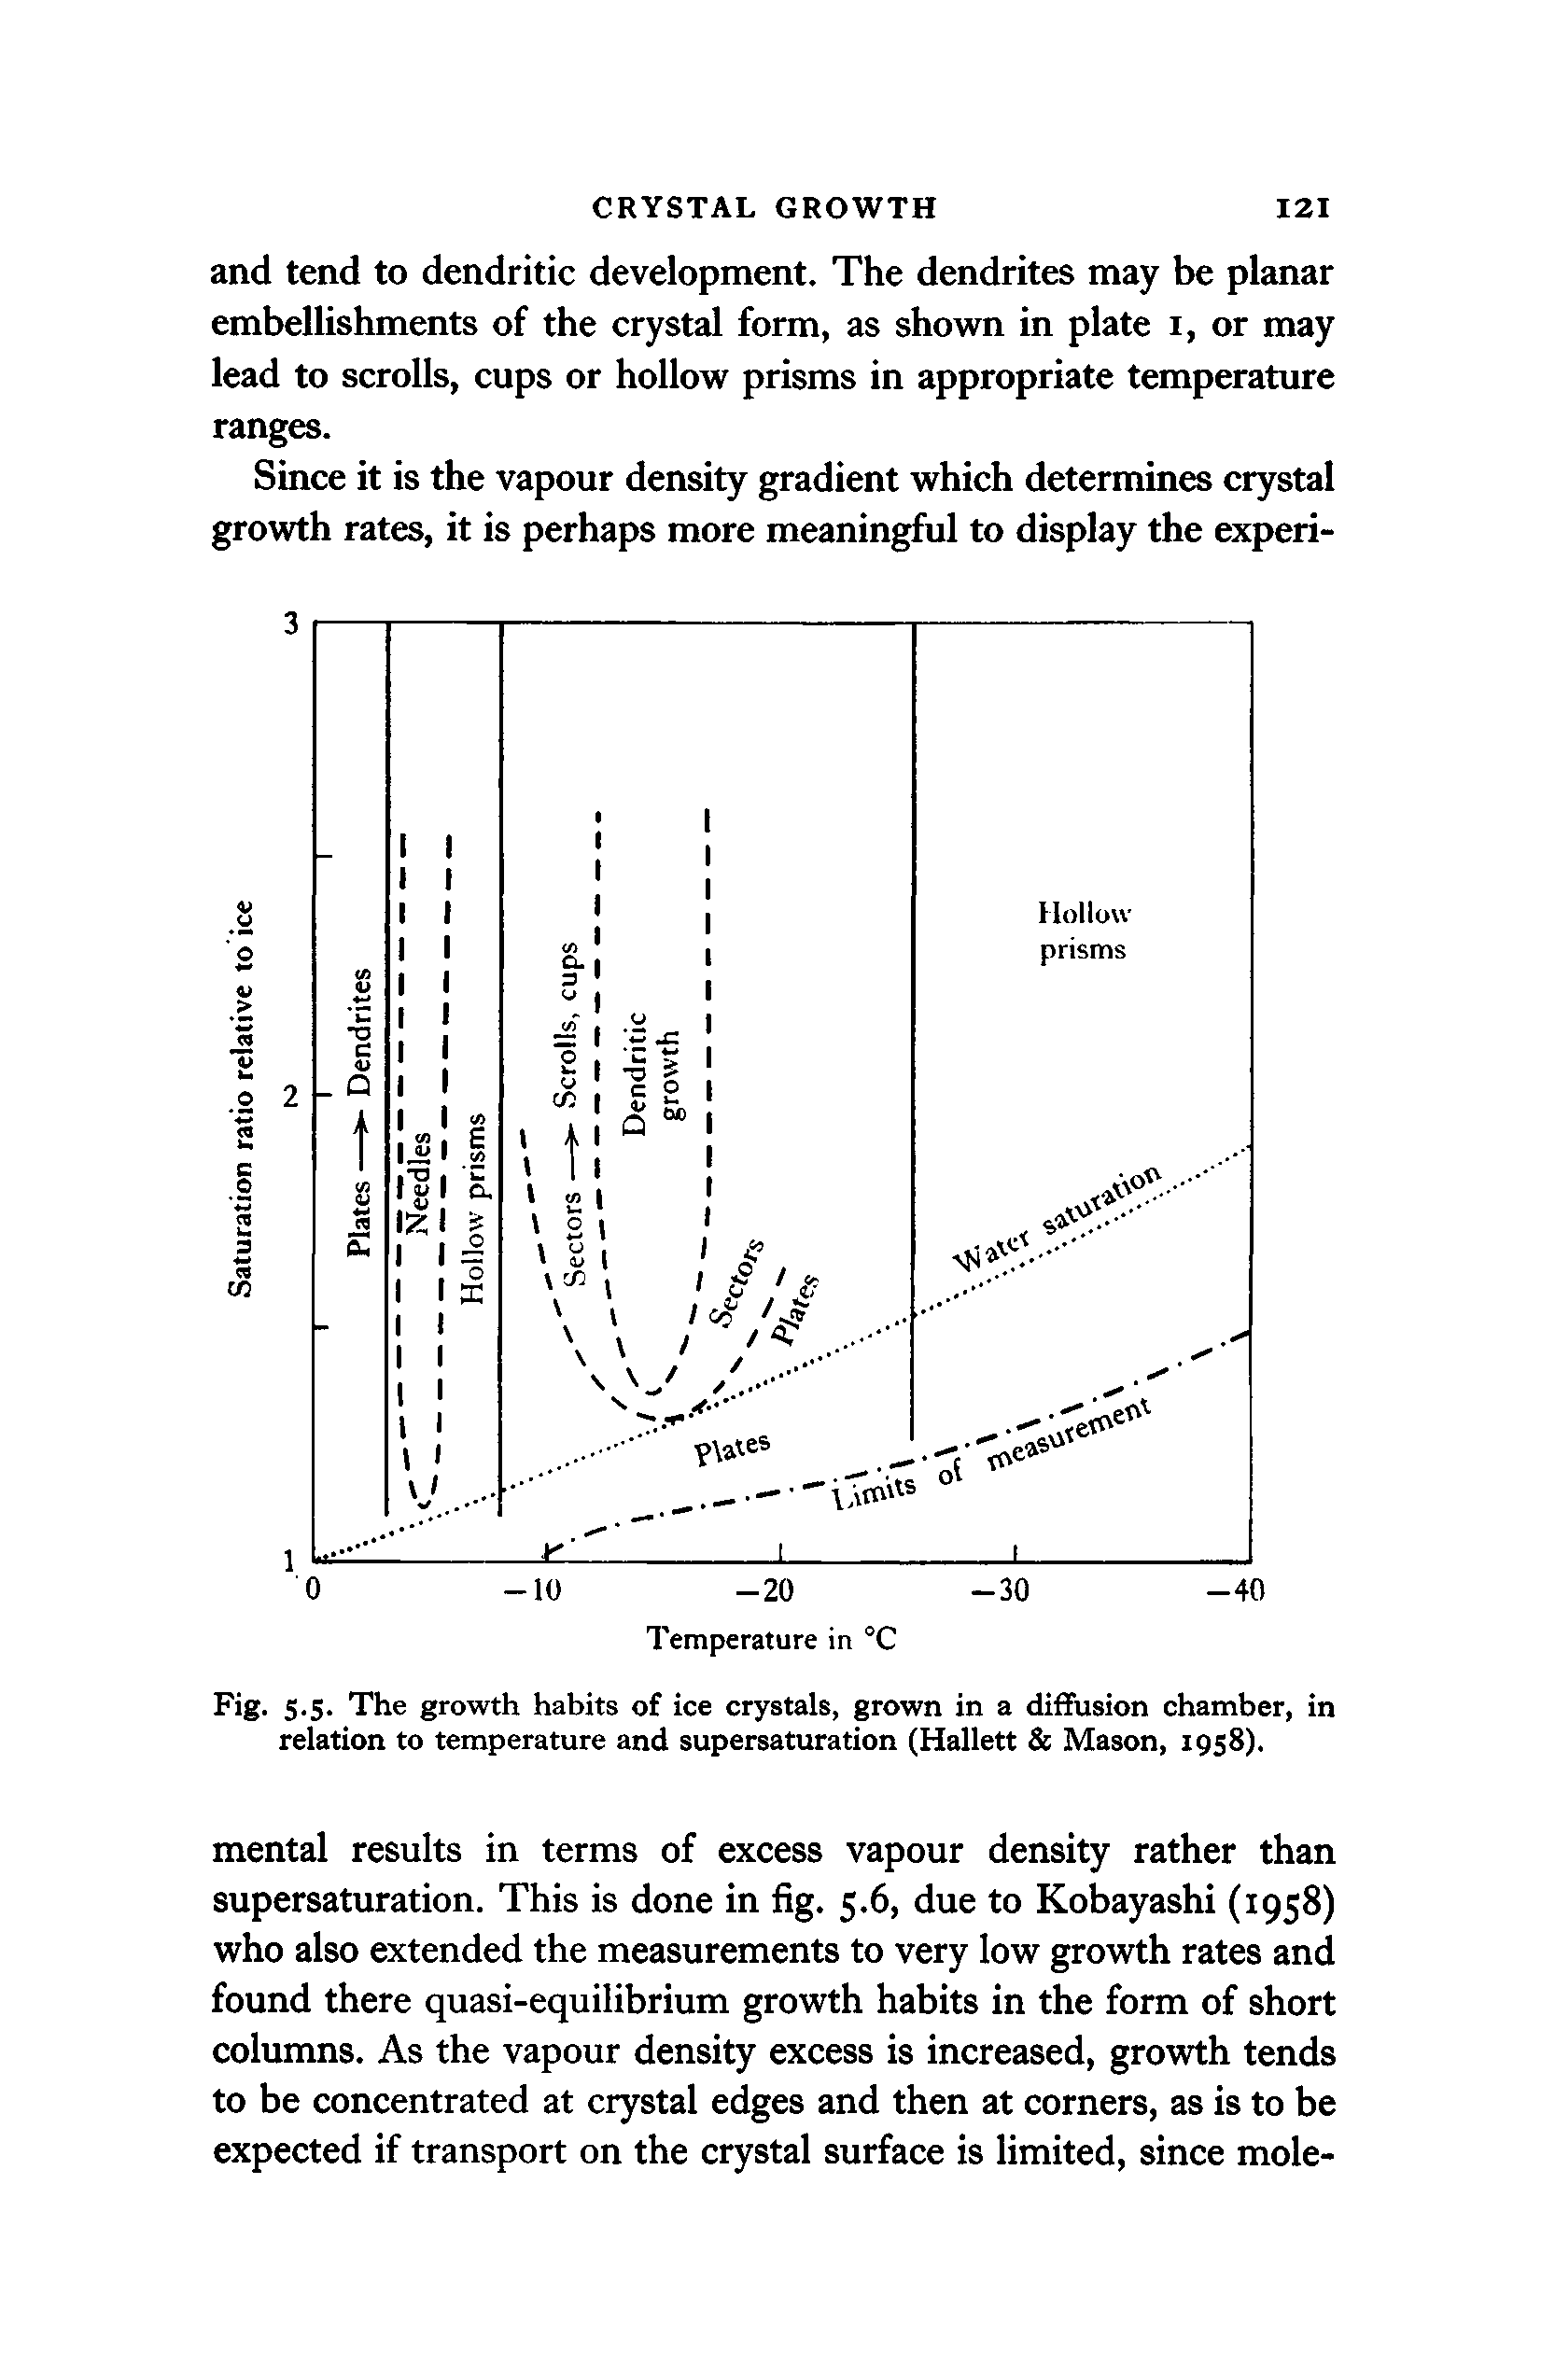 Fig. 5.5. The growth habits of ice crystals, grown in a diffusion chamber, in relation to temperature and supersaturation (Hallett Mason, 1958).